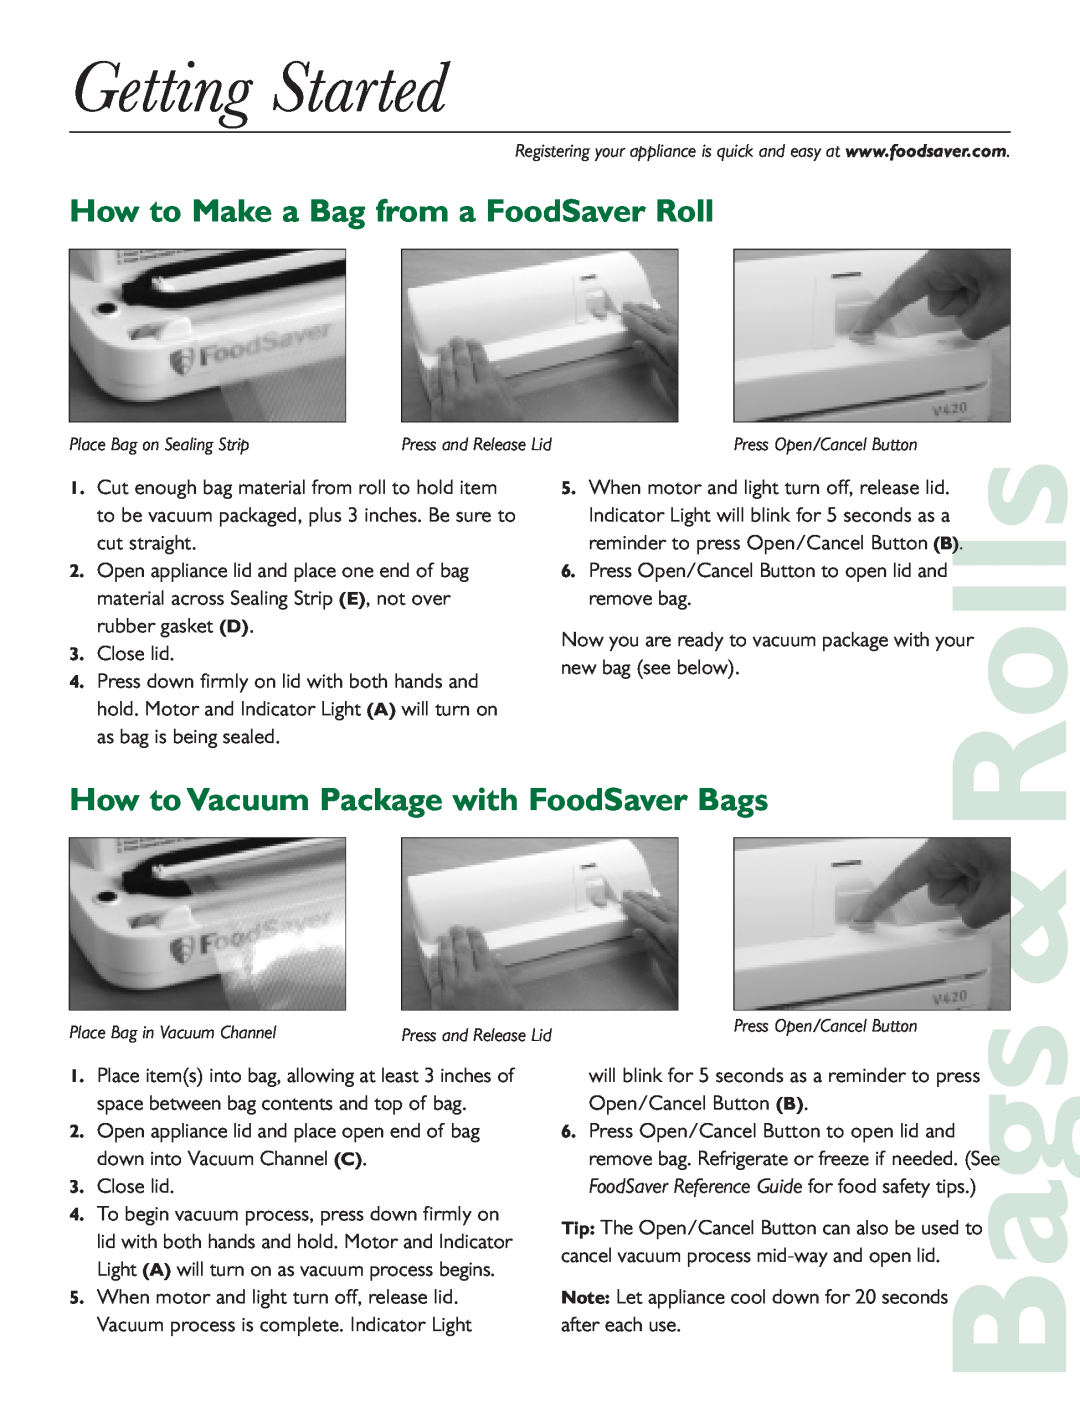 FoodSaver V240 quick start How to Make a Bag from a FoodSaver Roll, Rolls, Getting Started 